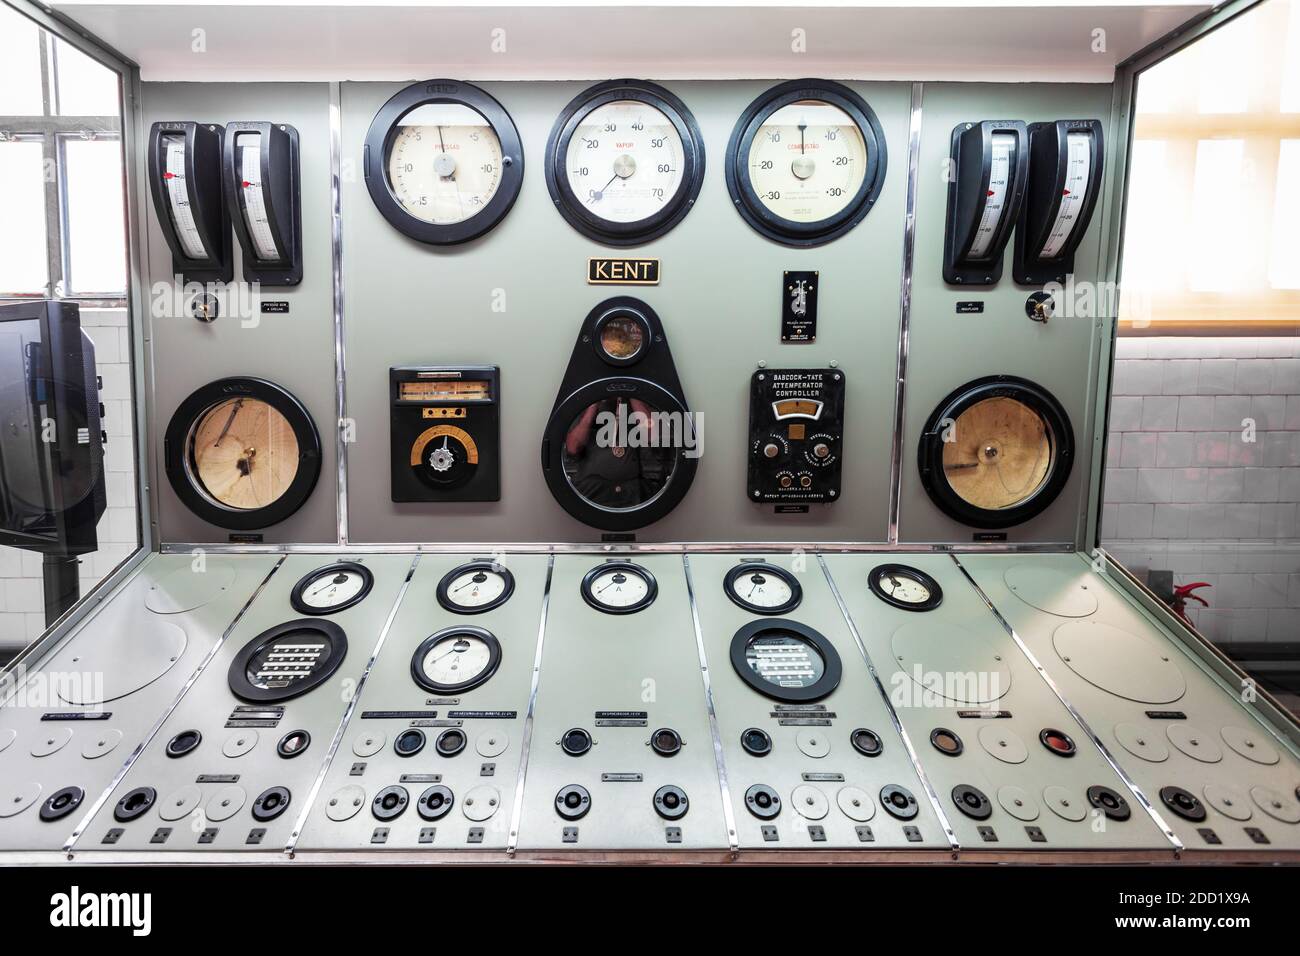 LISBON, PORTUGAL - JUNE 25, 2014: Electric control panel at the Tejo Power Station Electricity Museum in Lisbon city, Portugal Stock Photo